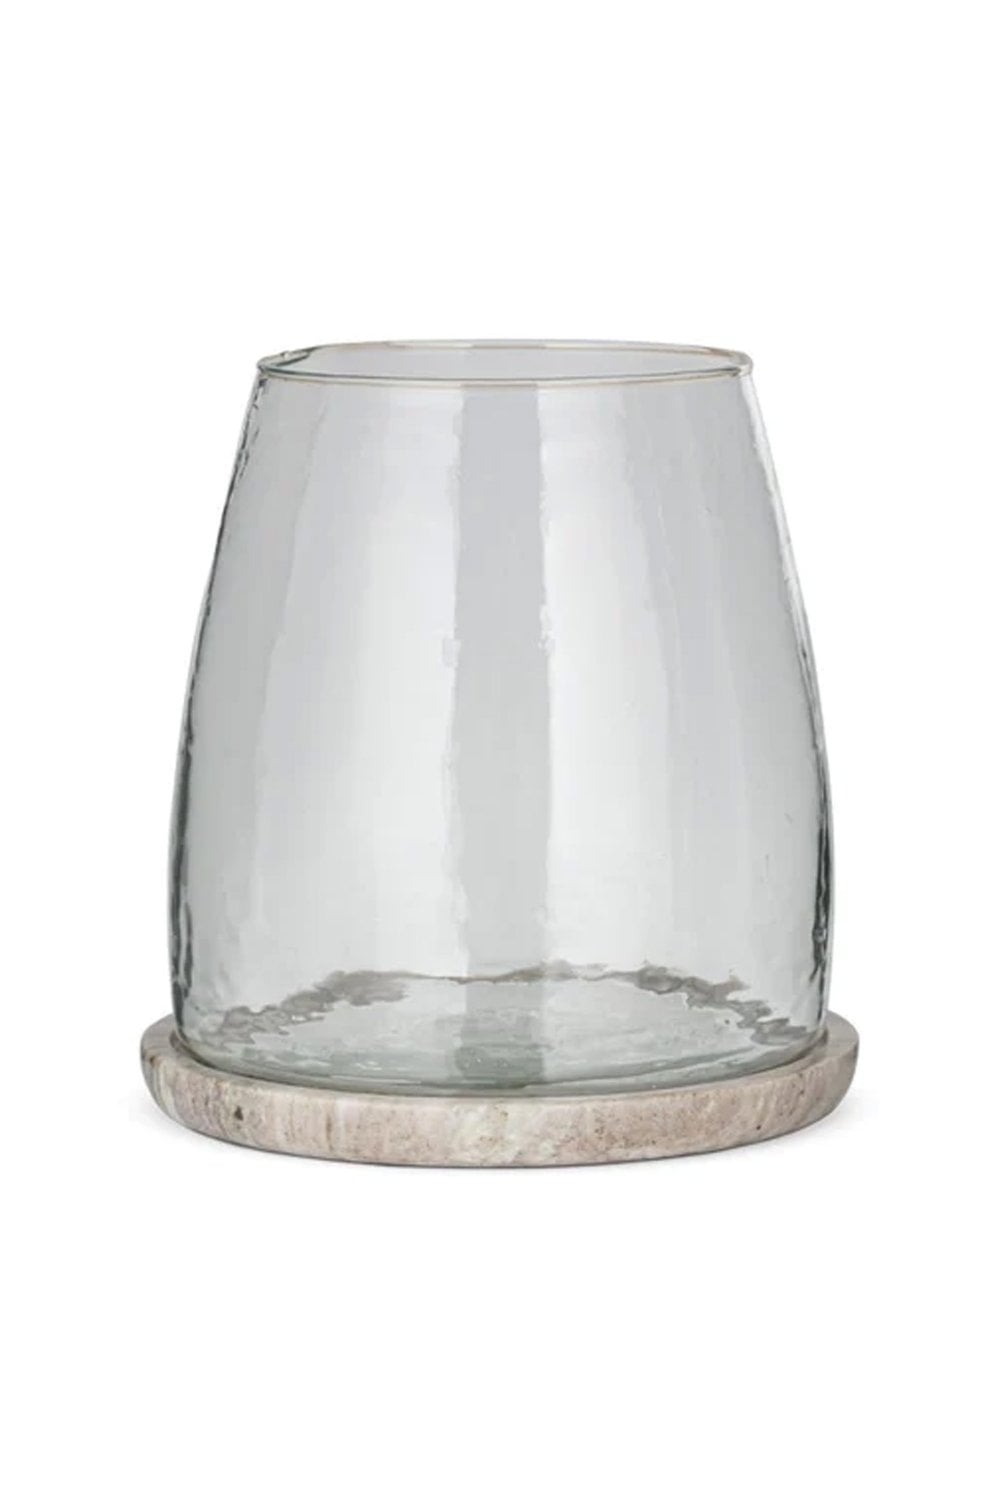 Nkuku Sikkim Marble And Clear Recycled Glass Lantern